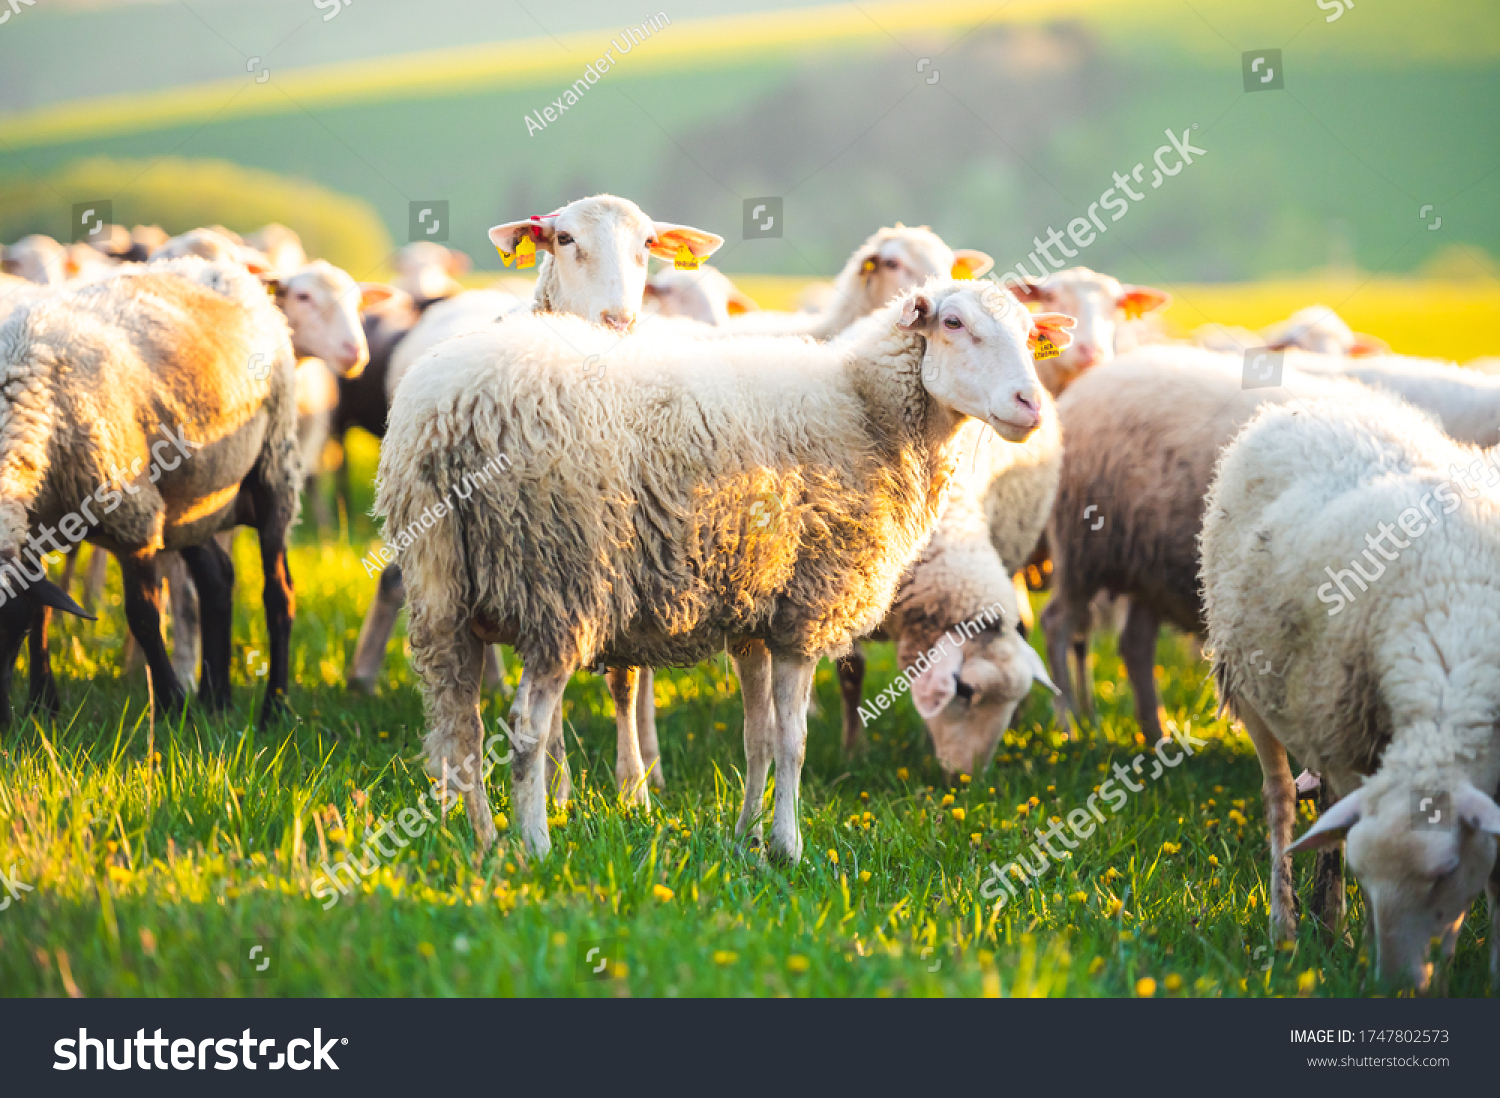 Sheeps in a meadow on green grass at sunset. Portrait of sheep. Flock of sheep grazing in a hill. #1747802573